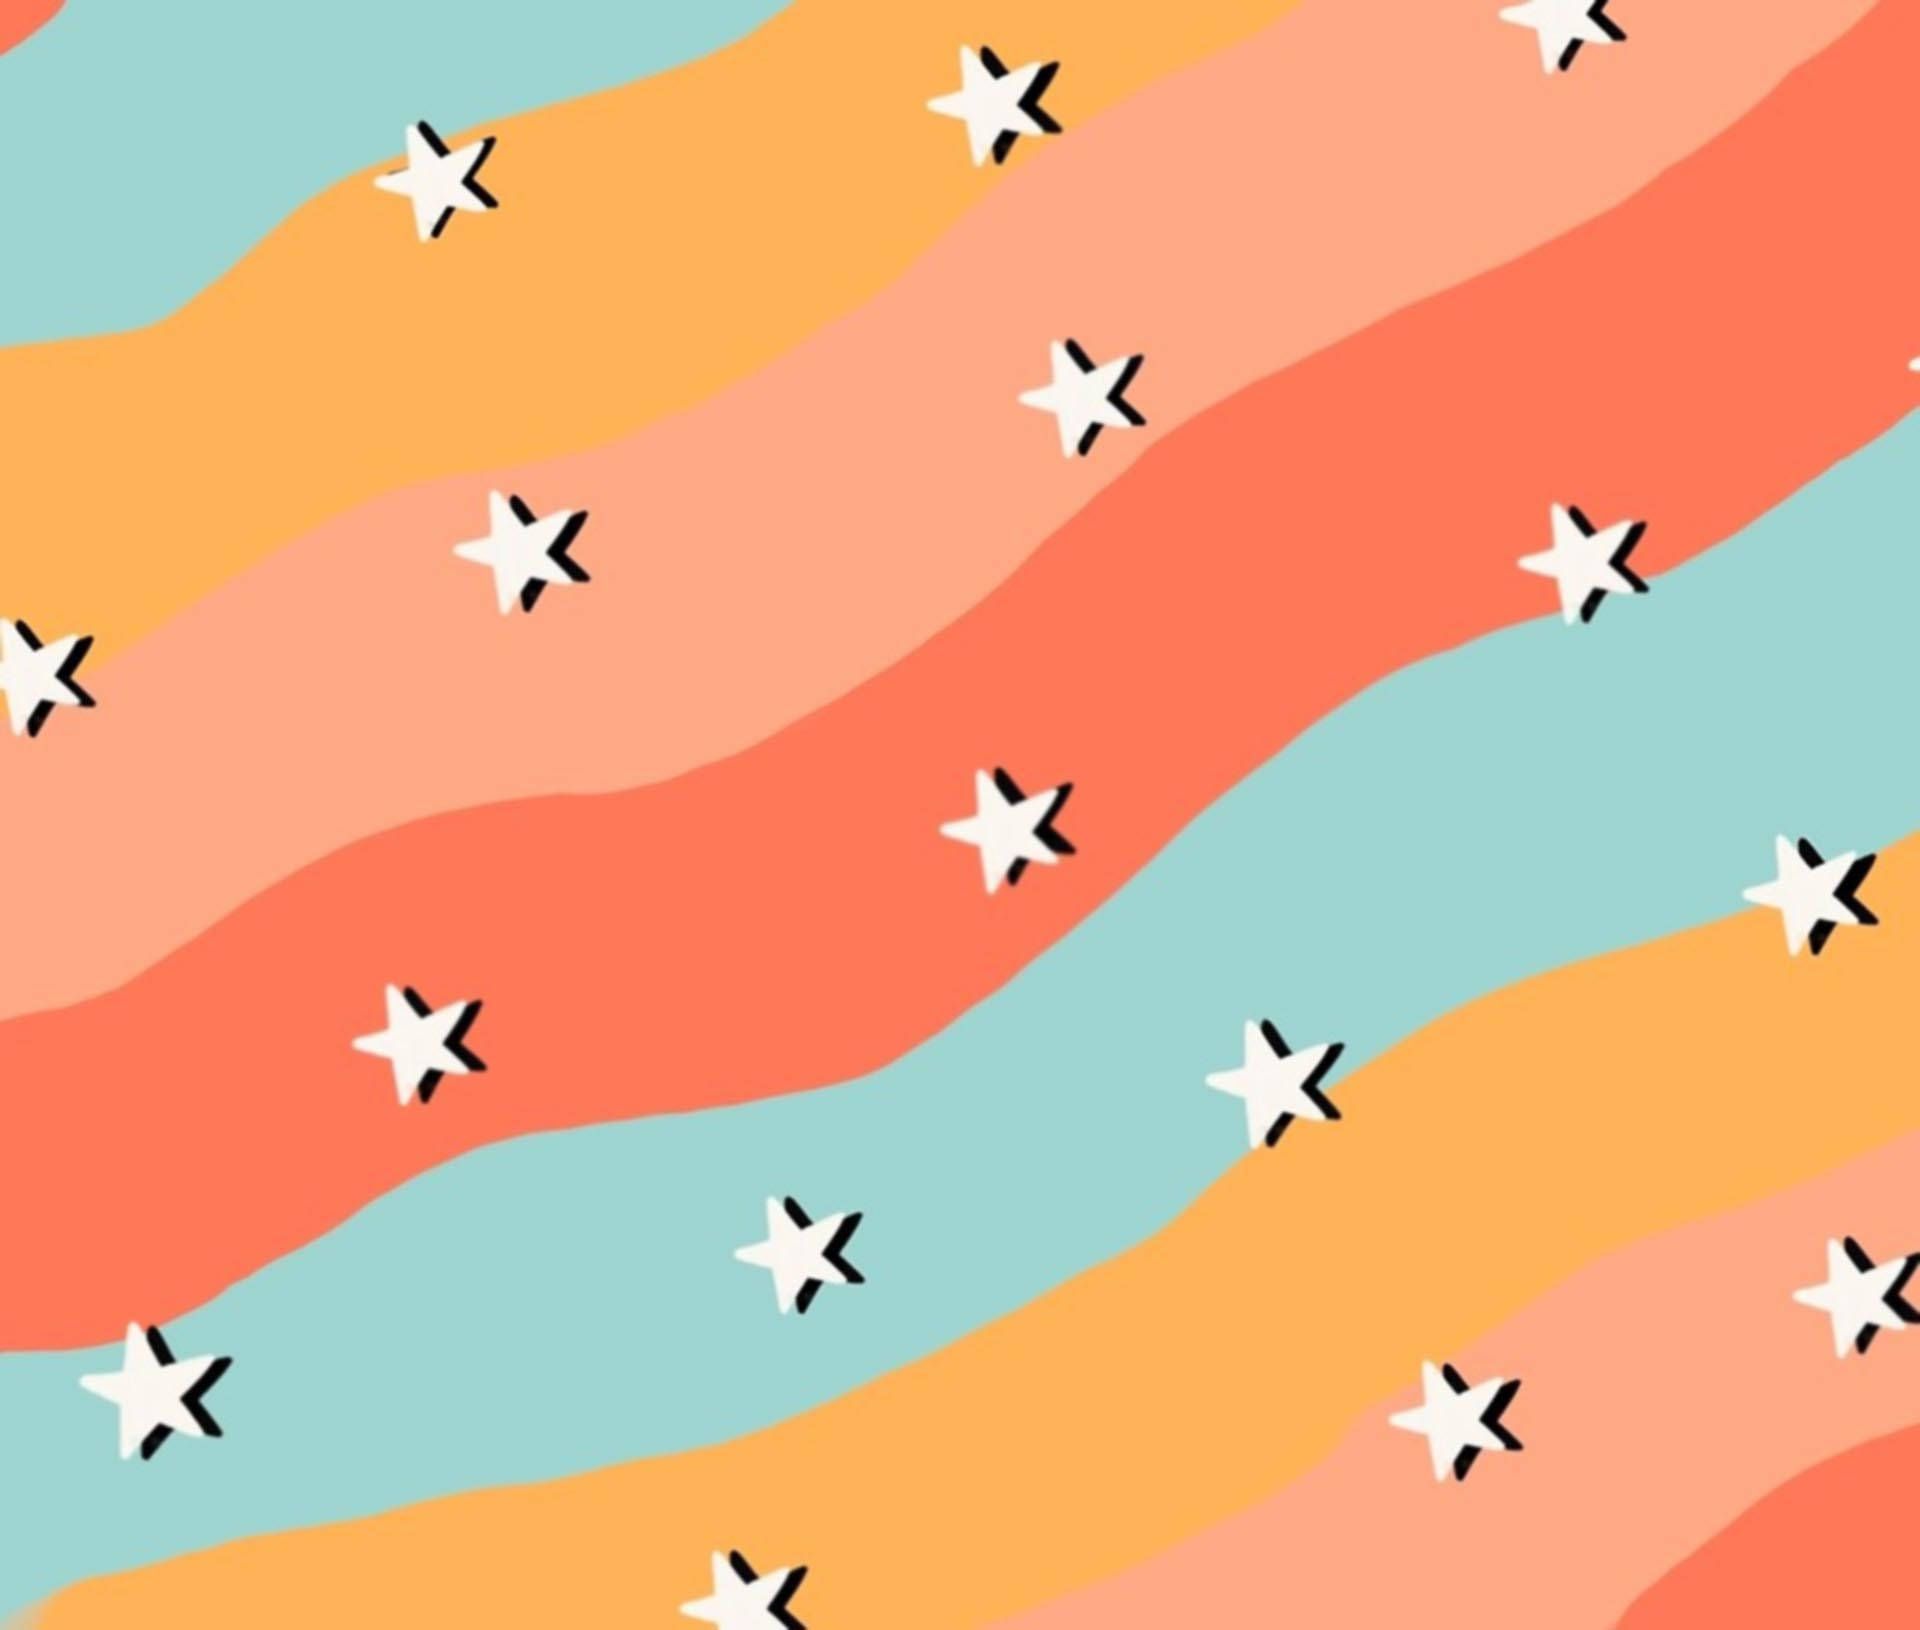 A colorful pattern with stars and stripes - Indie, HD, cute, pattern, stars, colorful, VSCO, laptop